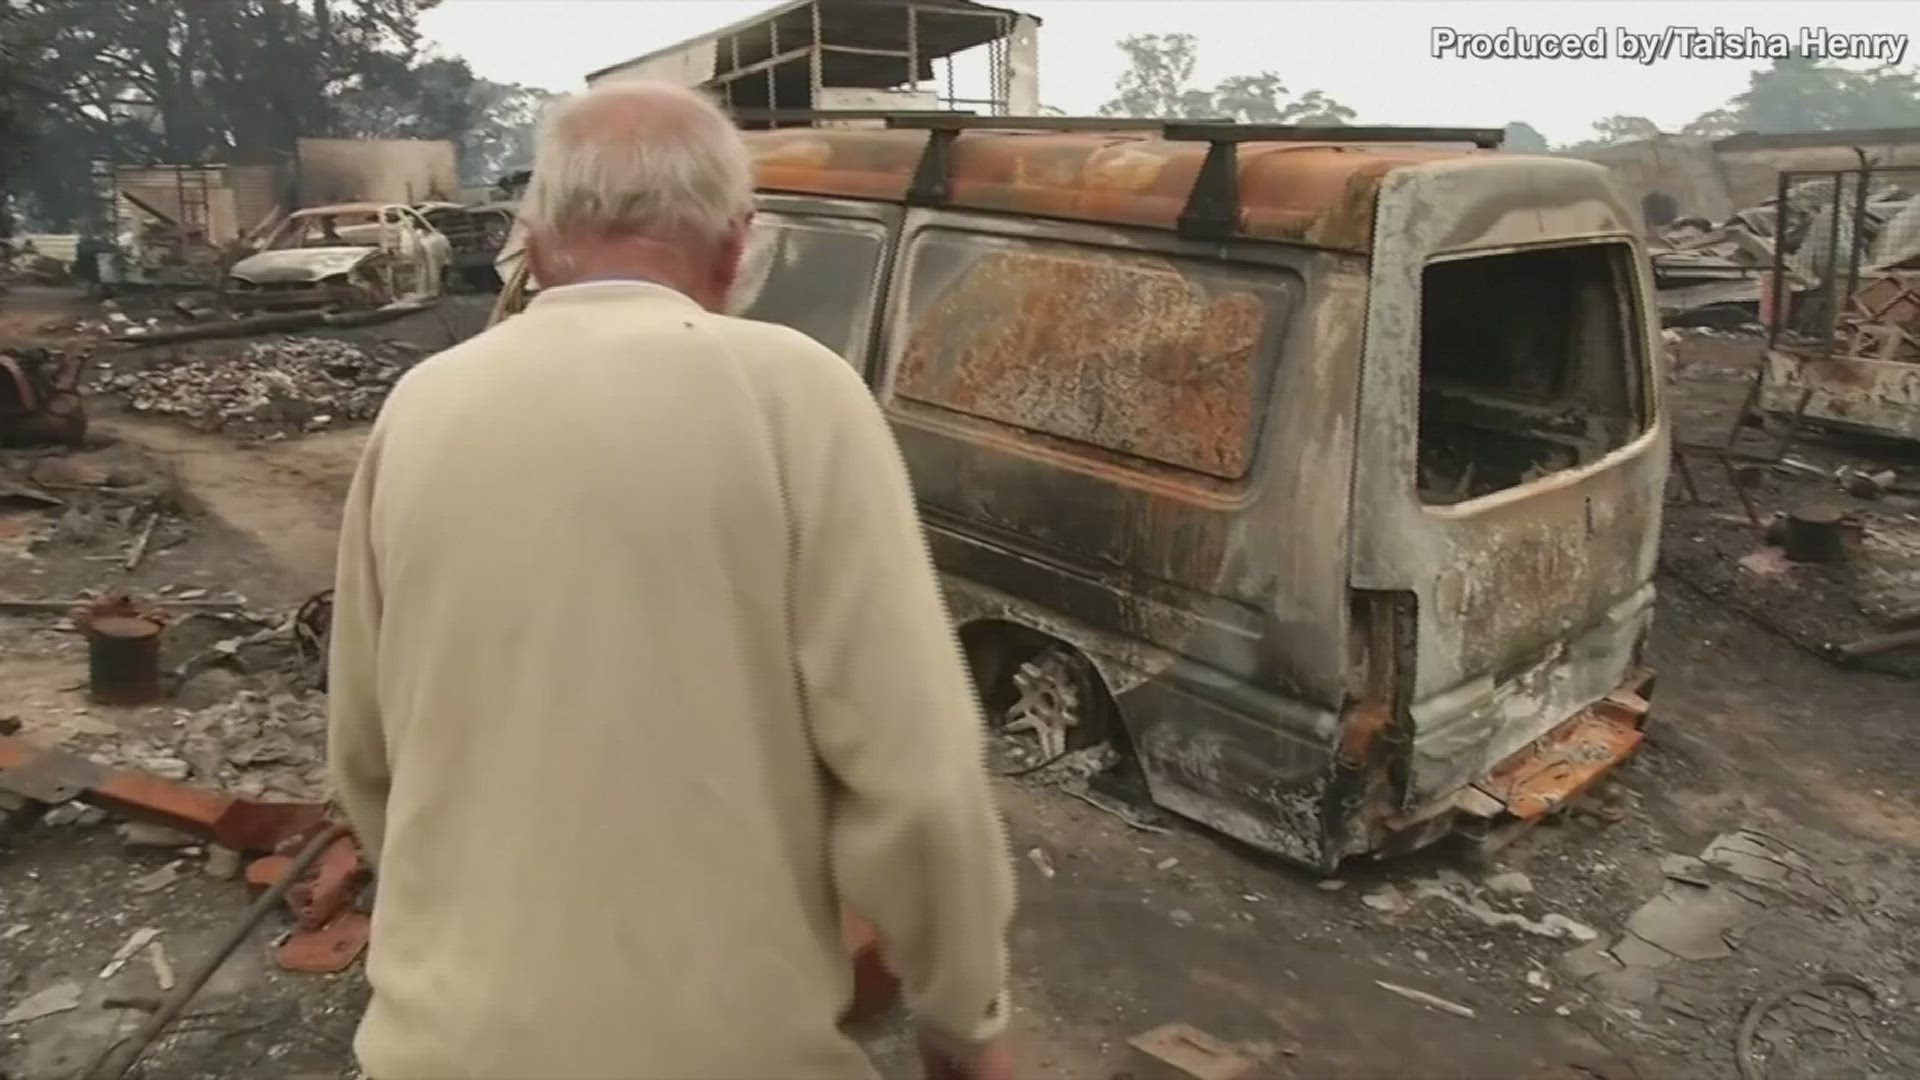 Ron Stonestreet, an australian living in the small town of Wingello , lost his home to the fires burning across Australia, and says the flames engulfed the area like a bomb. Veuer's Taisha Henry has the story.